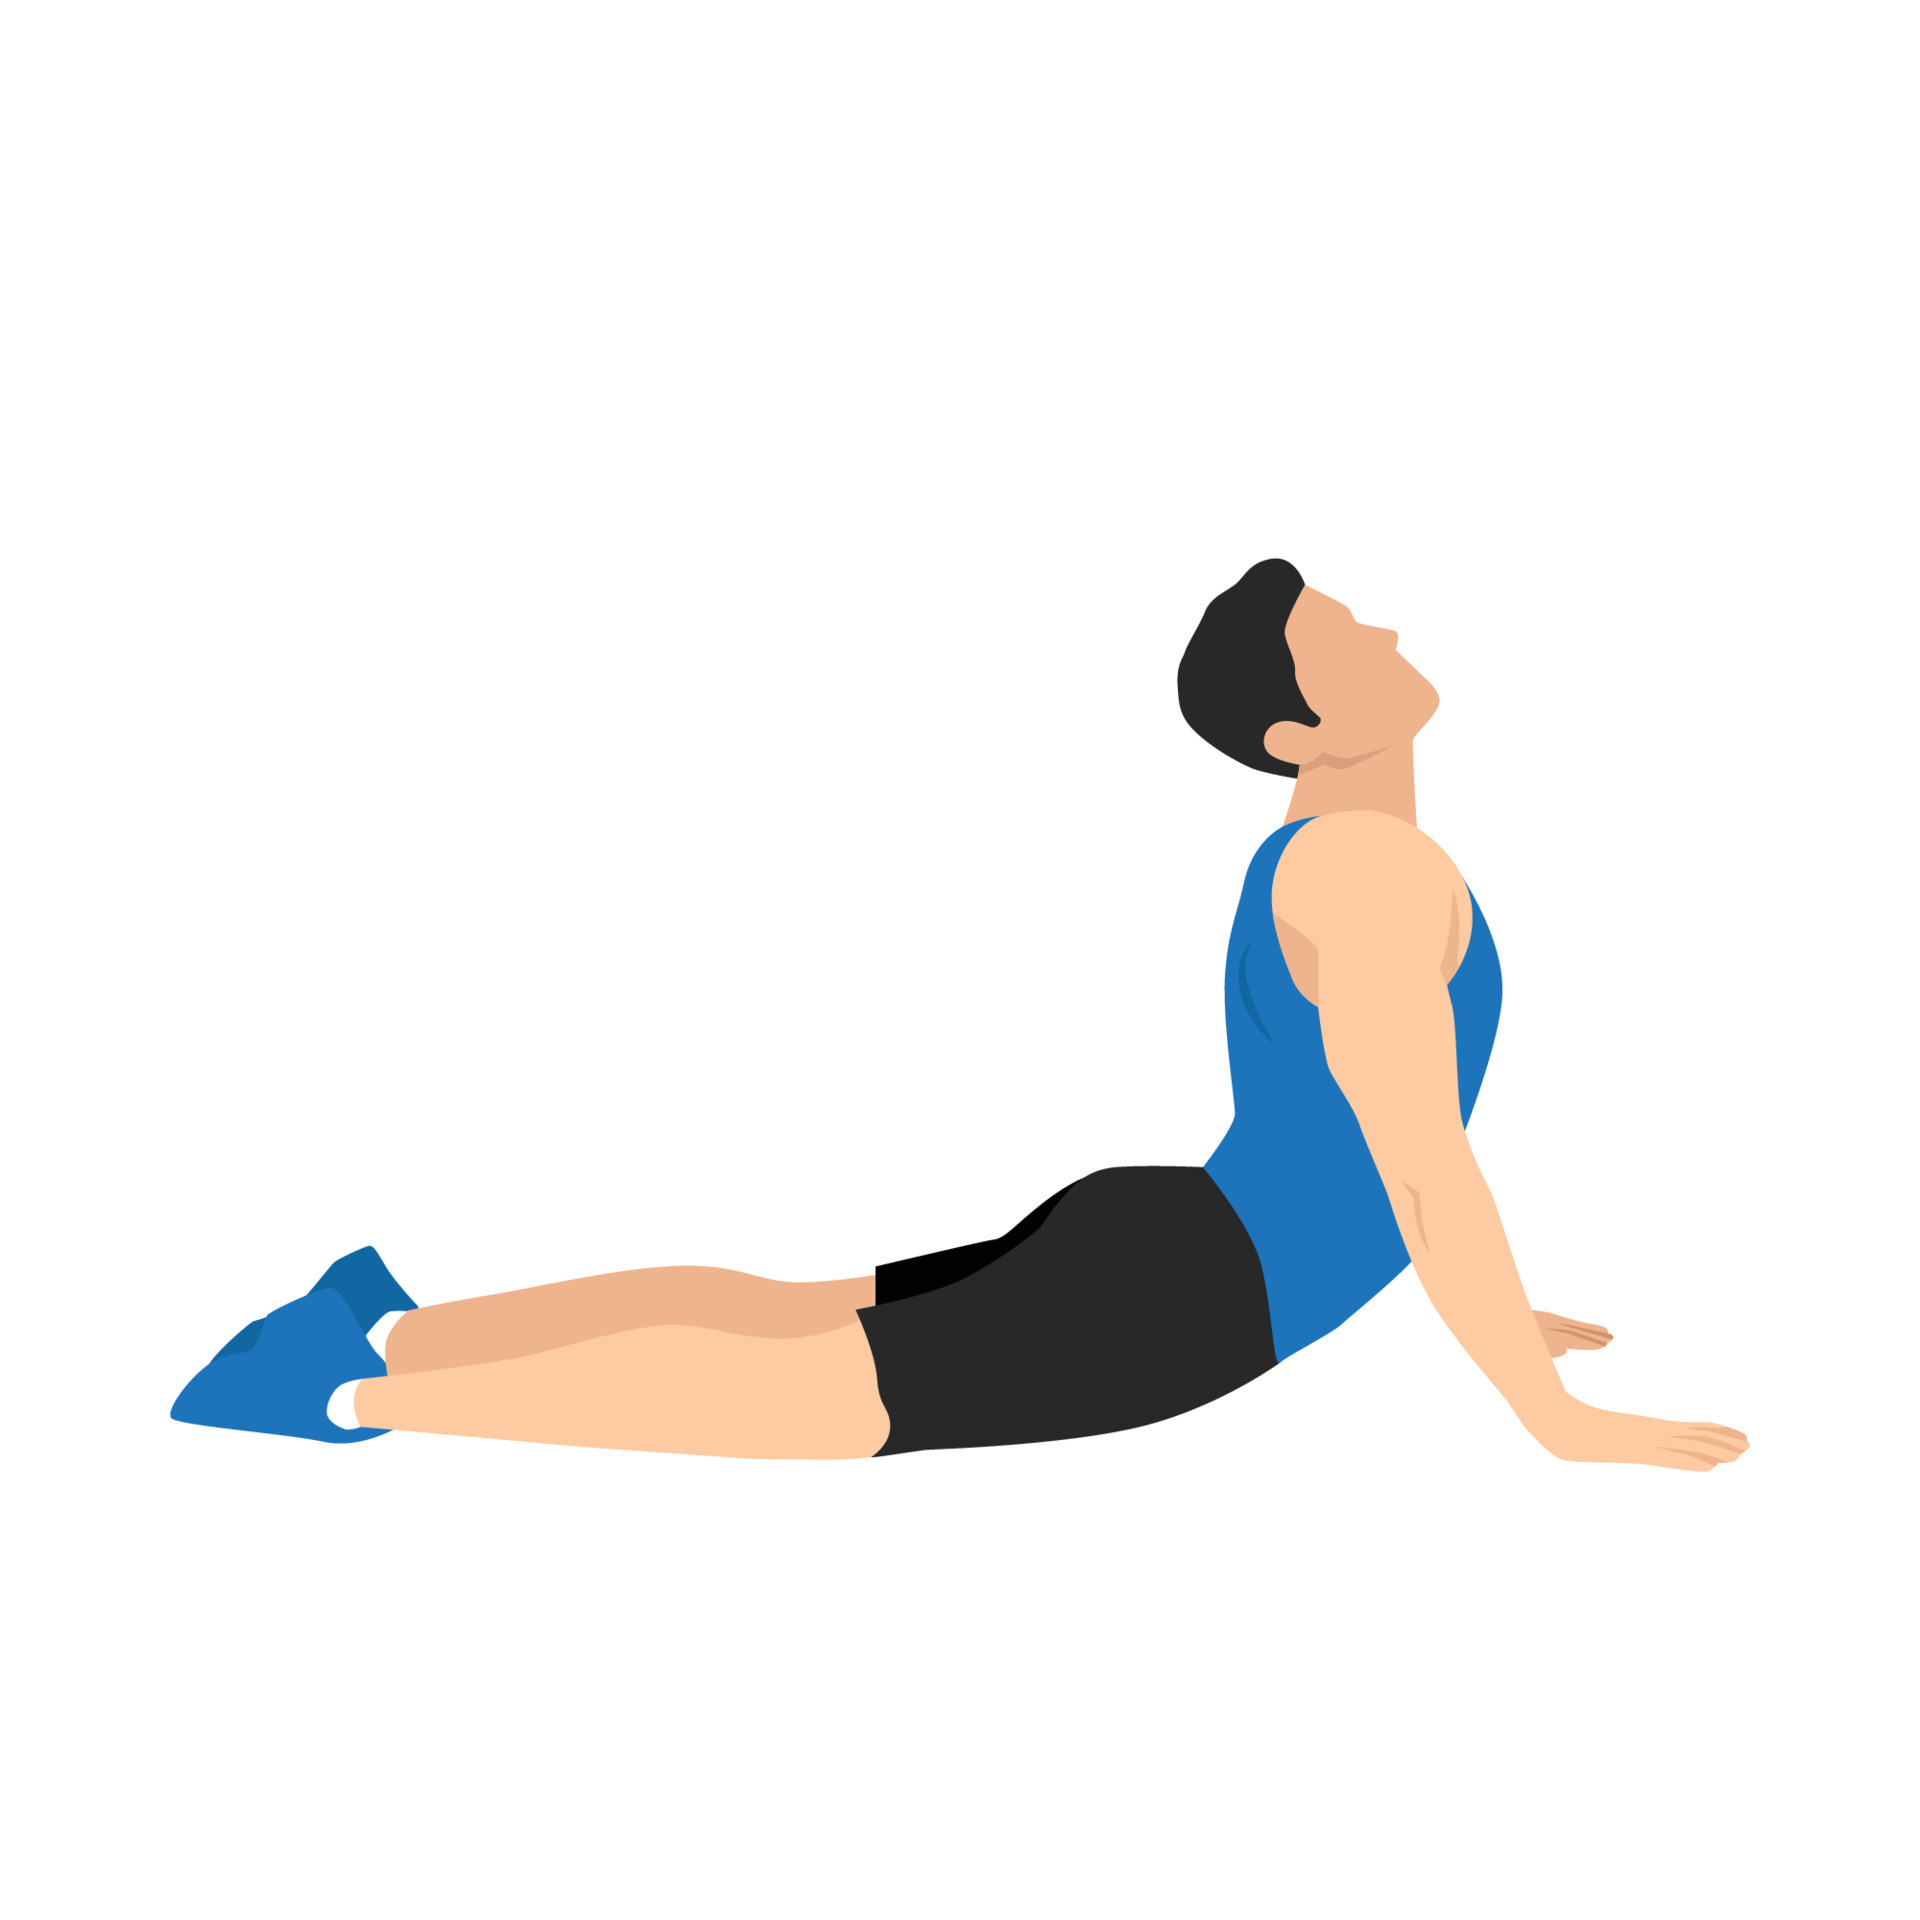 https://static.vecteezy.com/system/resources/previews/008/572/879/original/man-doing-cobra-abdominal-stretch-old-horse-stretch-abdominals-exercise-flat-illustration-isolated-on-white-background-vector.jpg